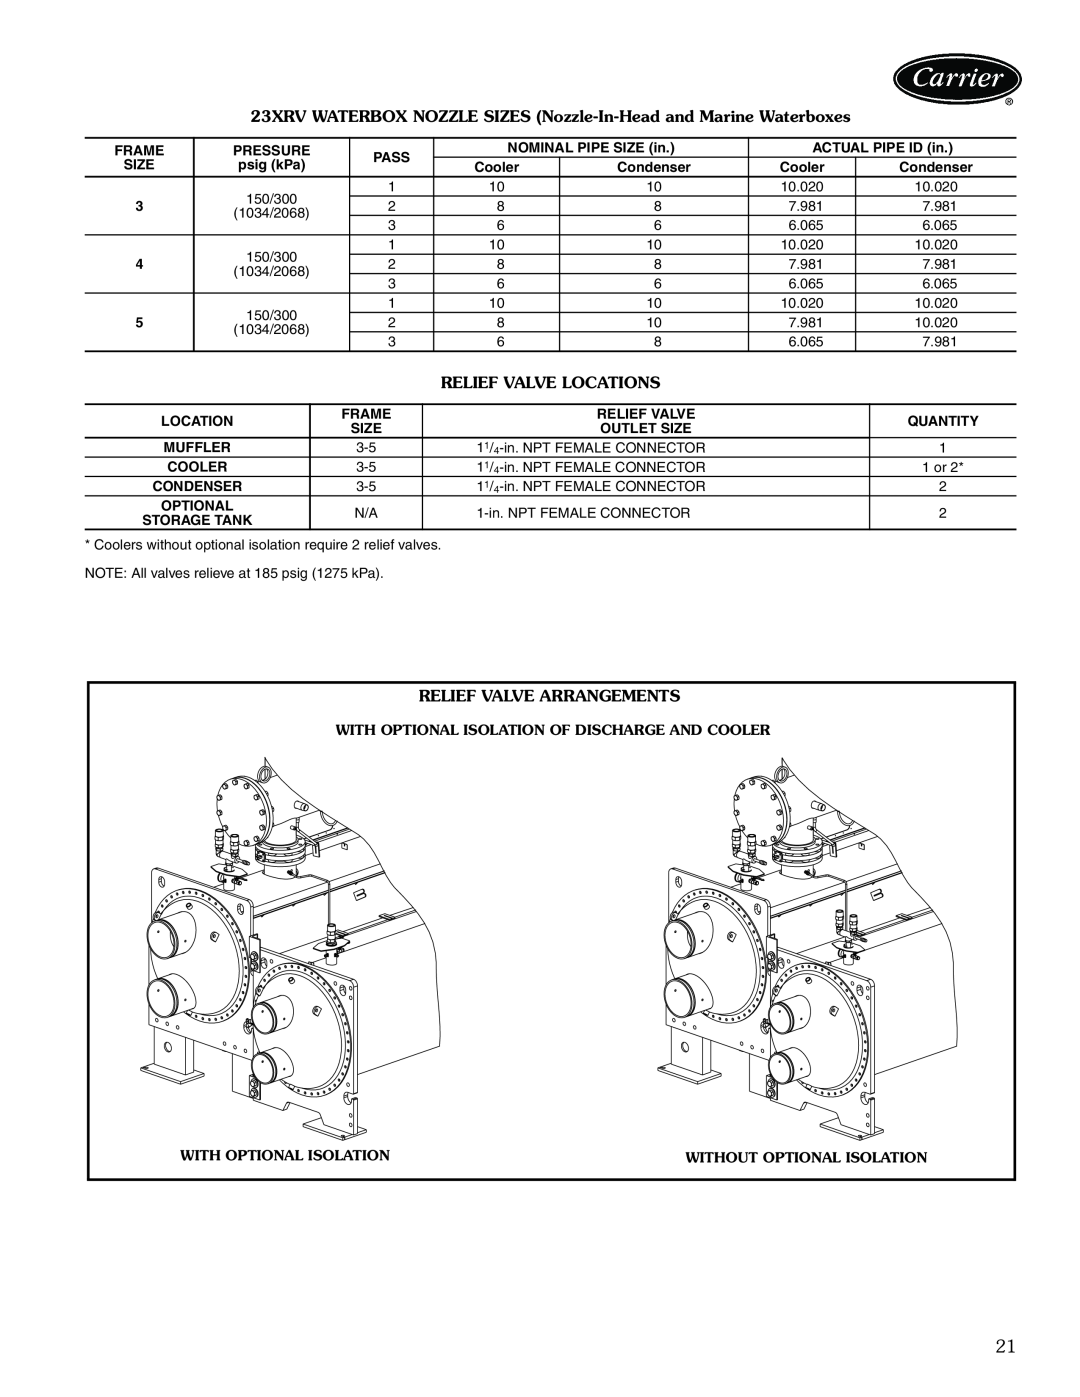 Carrier manual 23XRV WATERBOX NOZZLE SIZES Nozzle-In-Head and Marine Waterboxes, Relief Valve Locations 